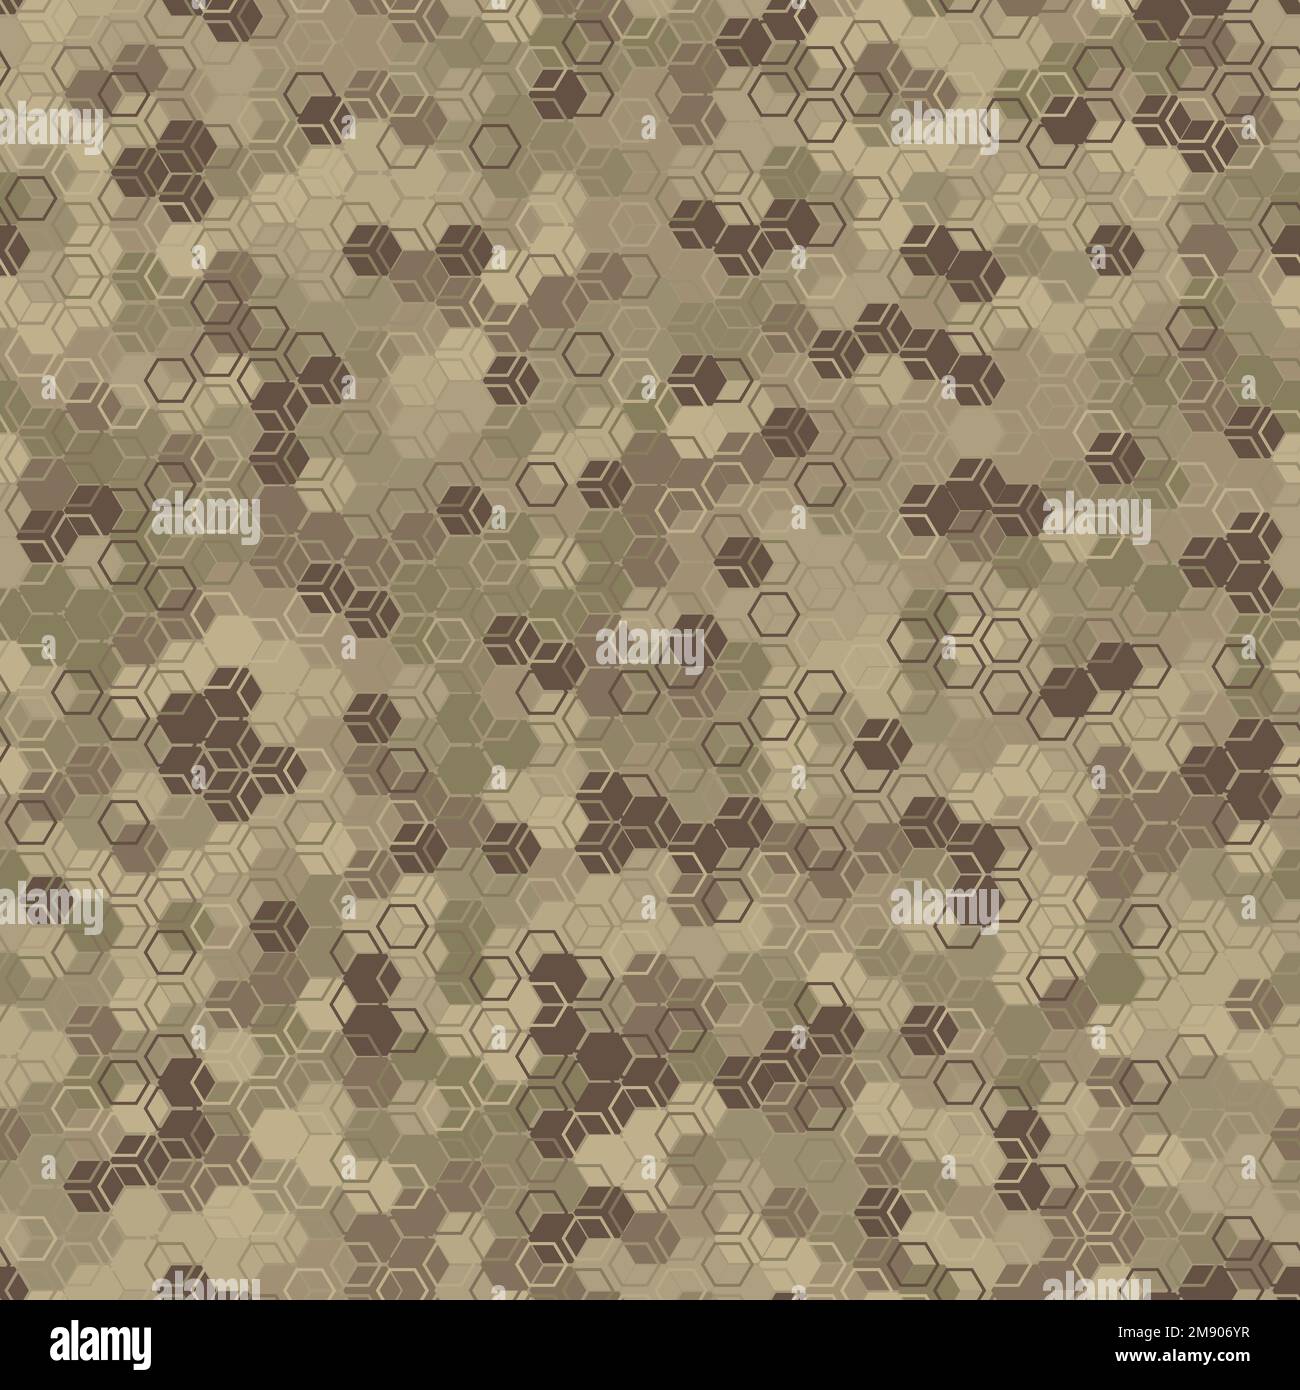 Camouflage, Seamless Pattern. Modern Military Ornament For Fabric